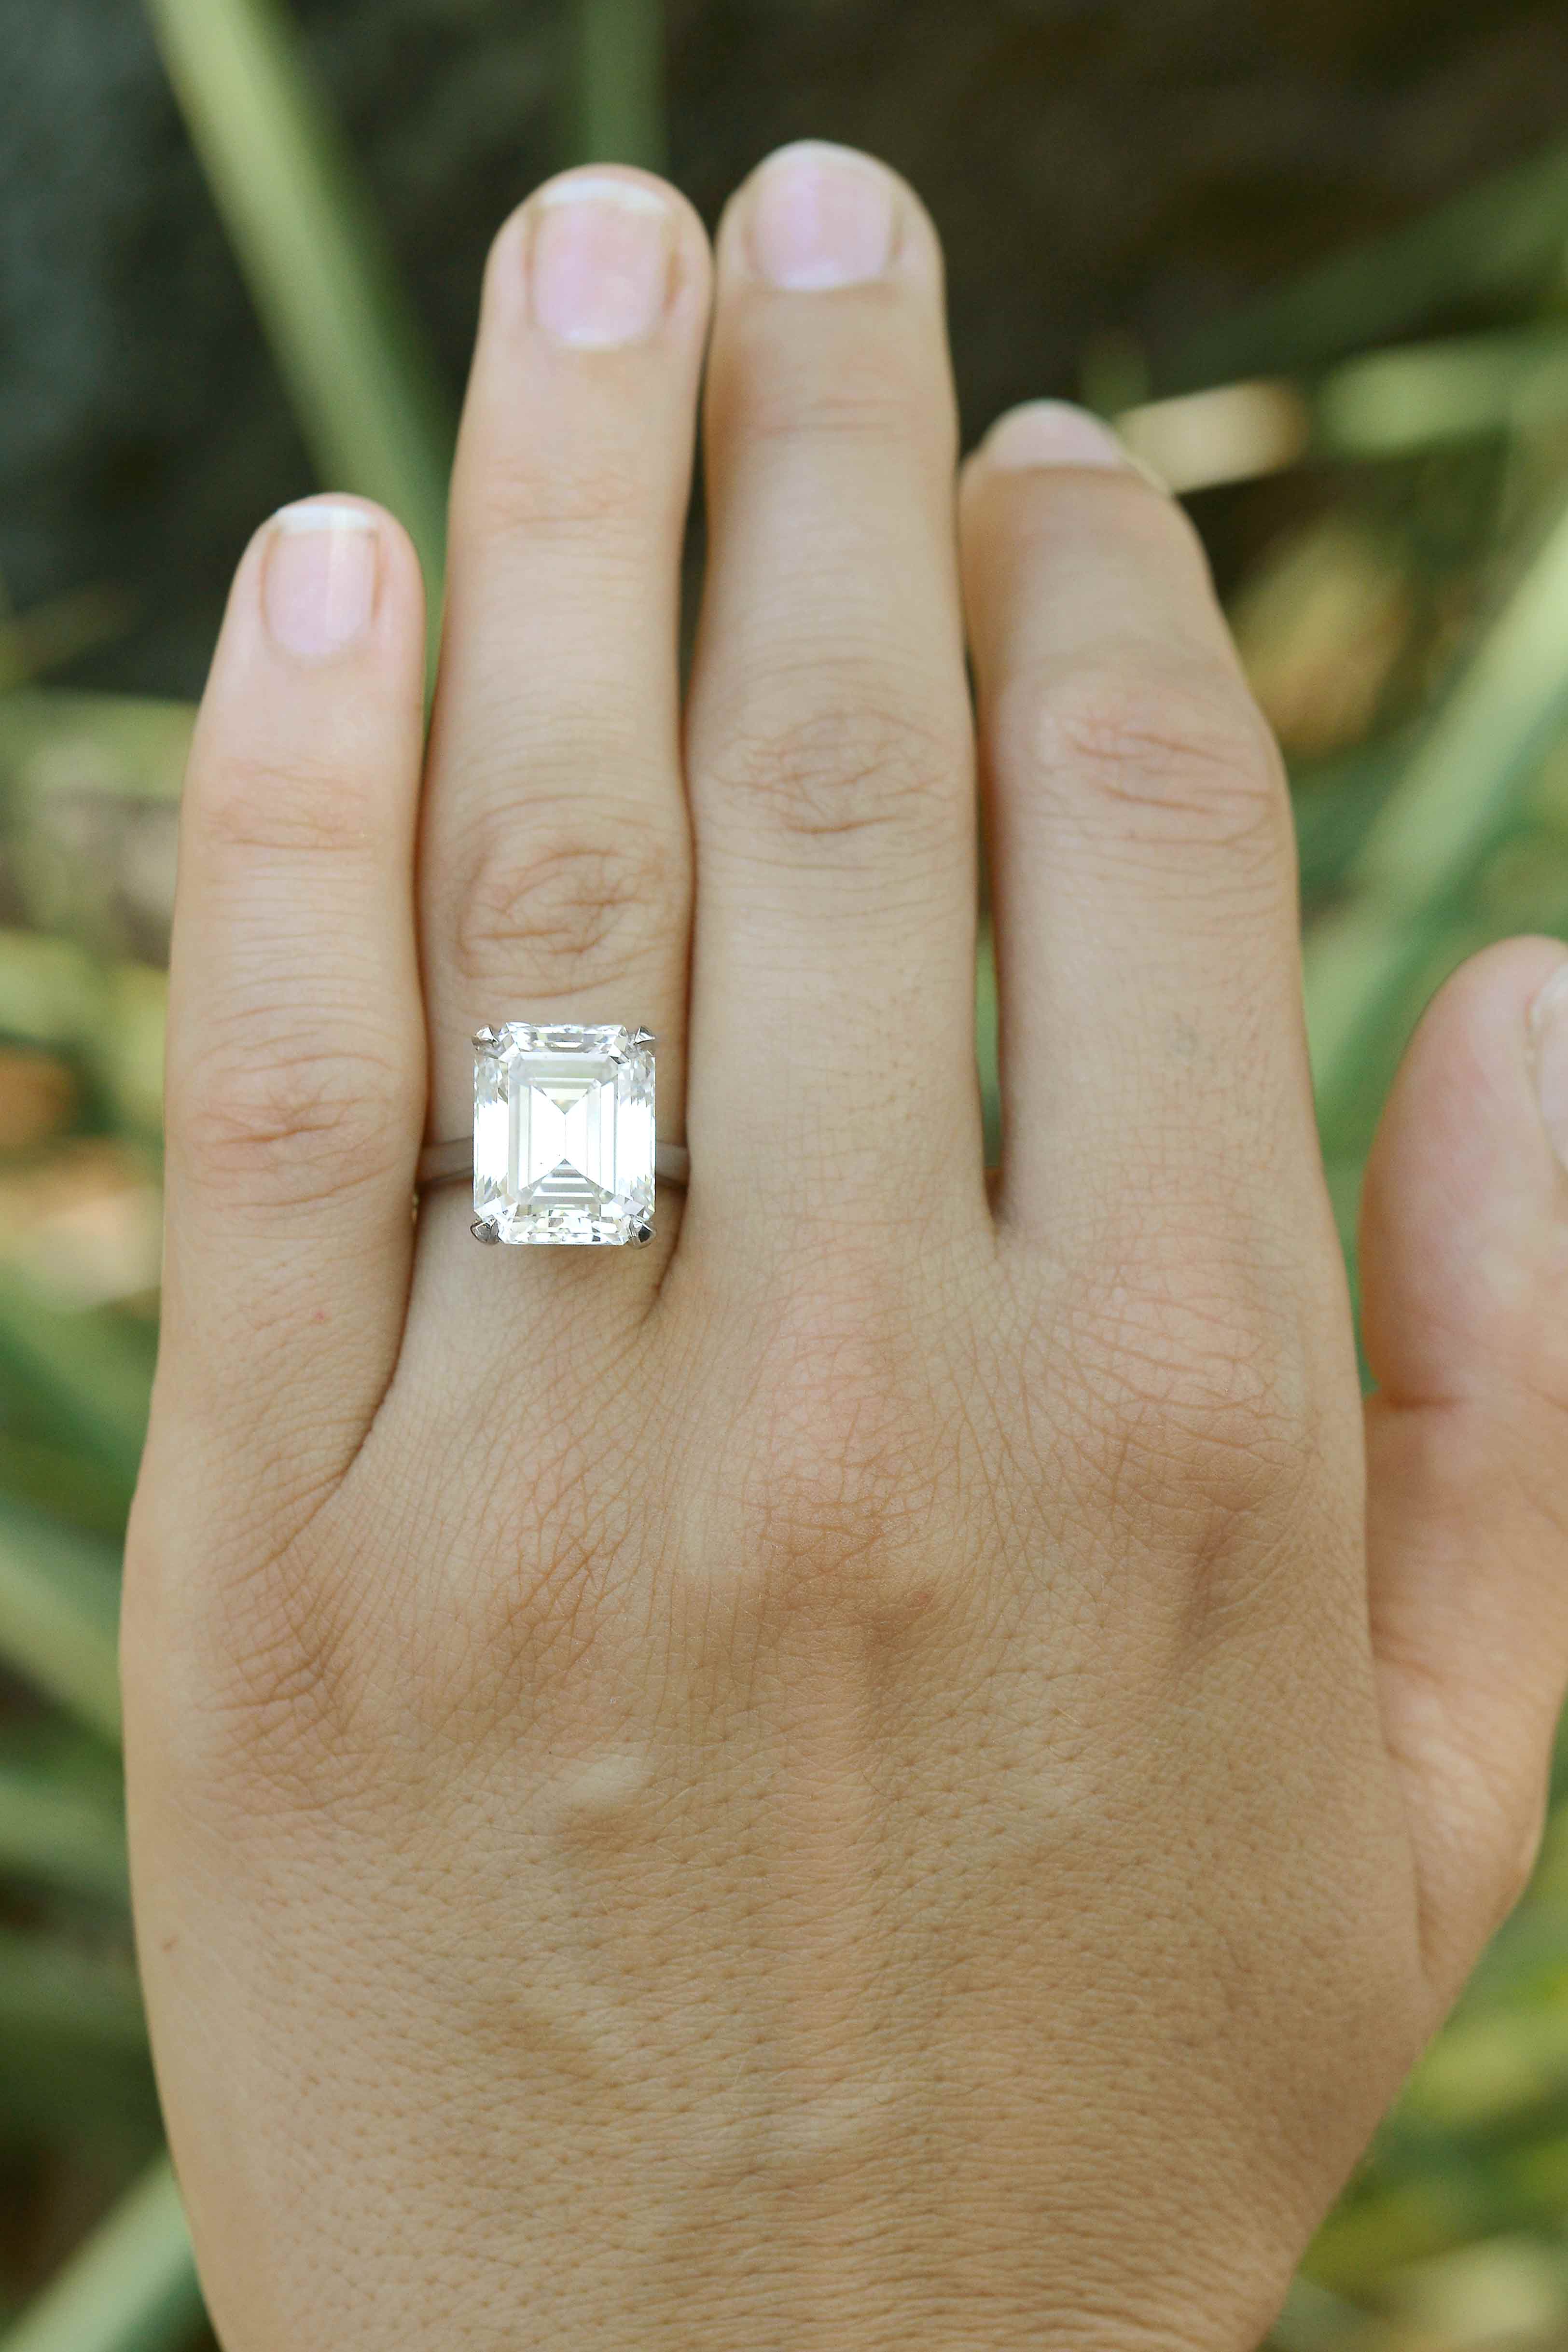 A giant emerald cut diamond set in a 4 prong soltaire setting.